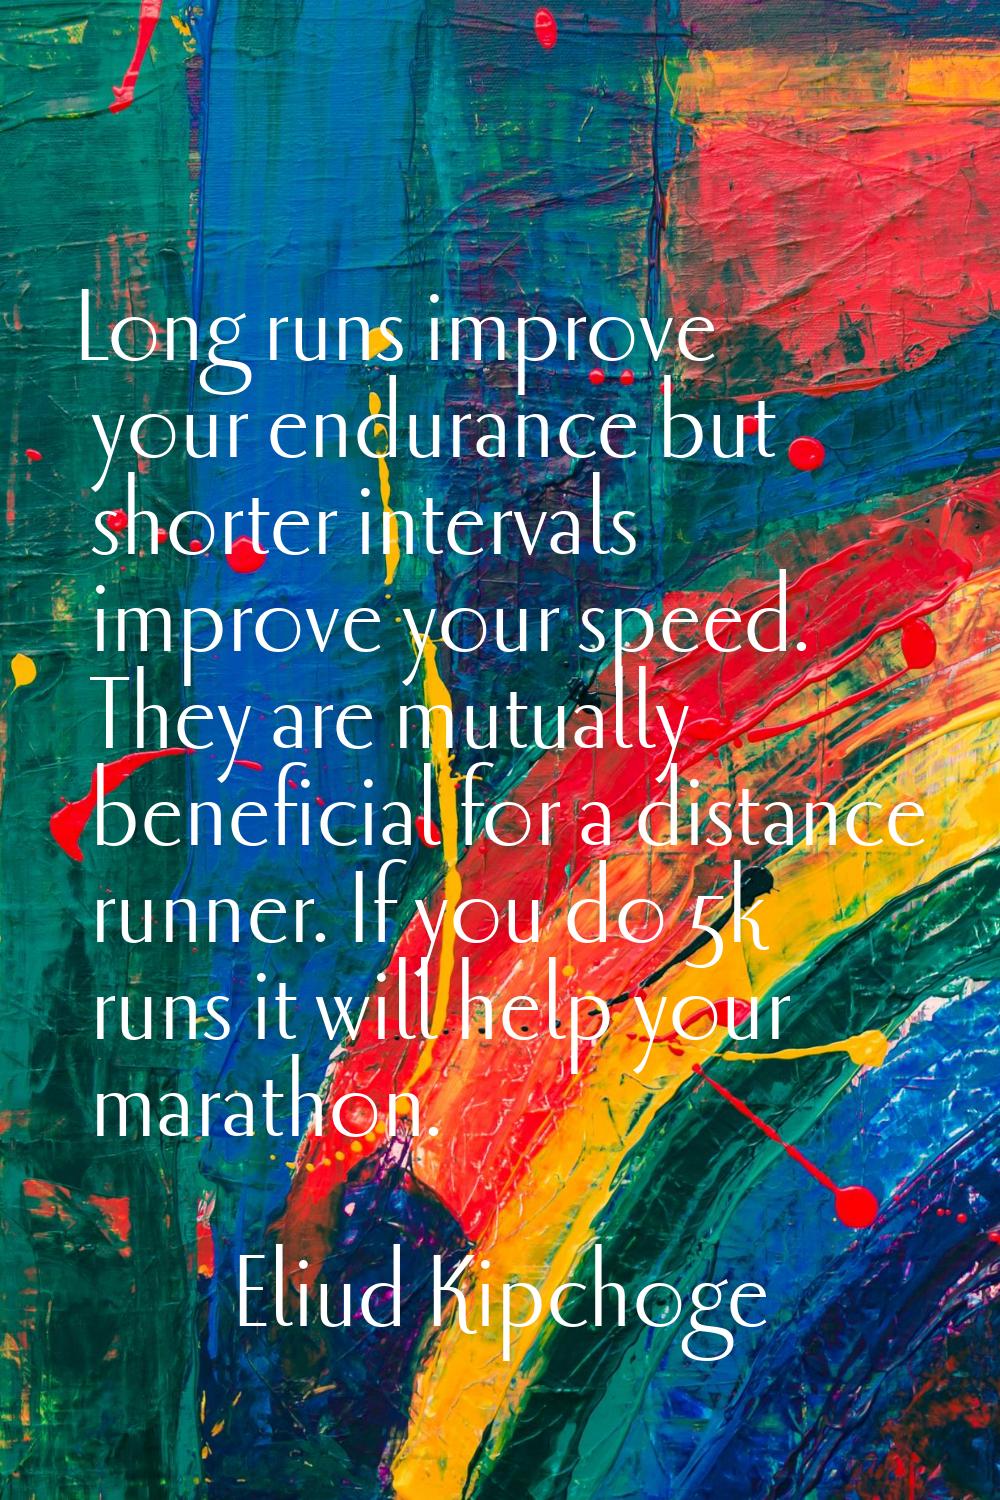 Long runs improve your endurance but shorter intervals improve your speed. They are mutually benefi